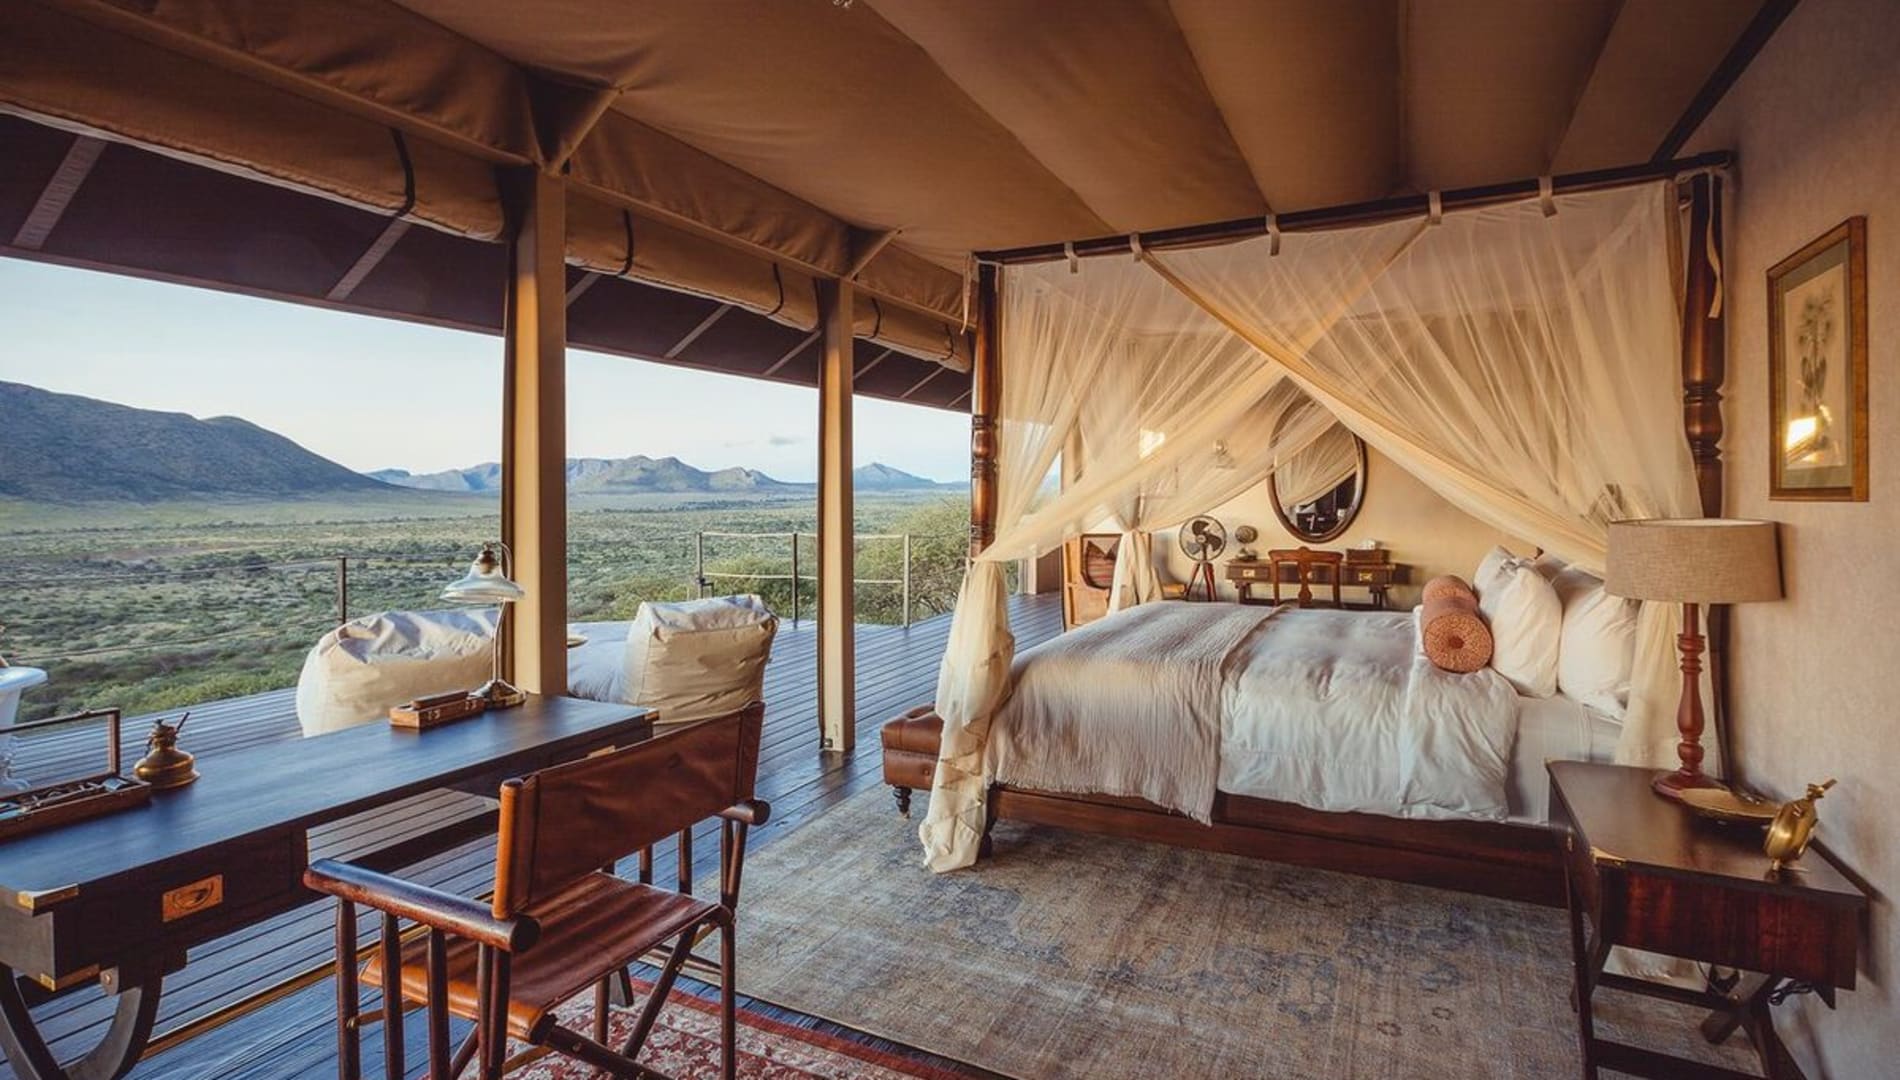 Luxury Group Lodges in Namibia: Accommodation for Unforgettable Gatherings